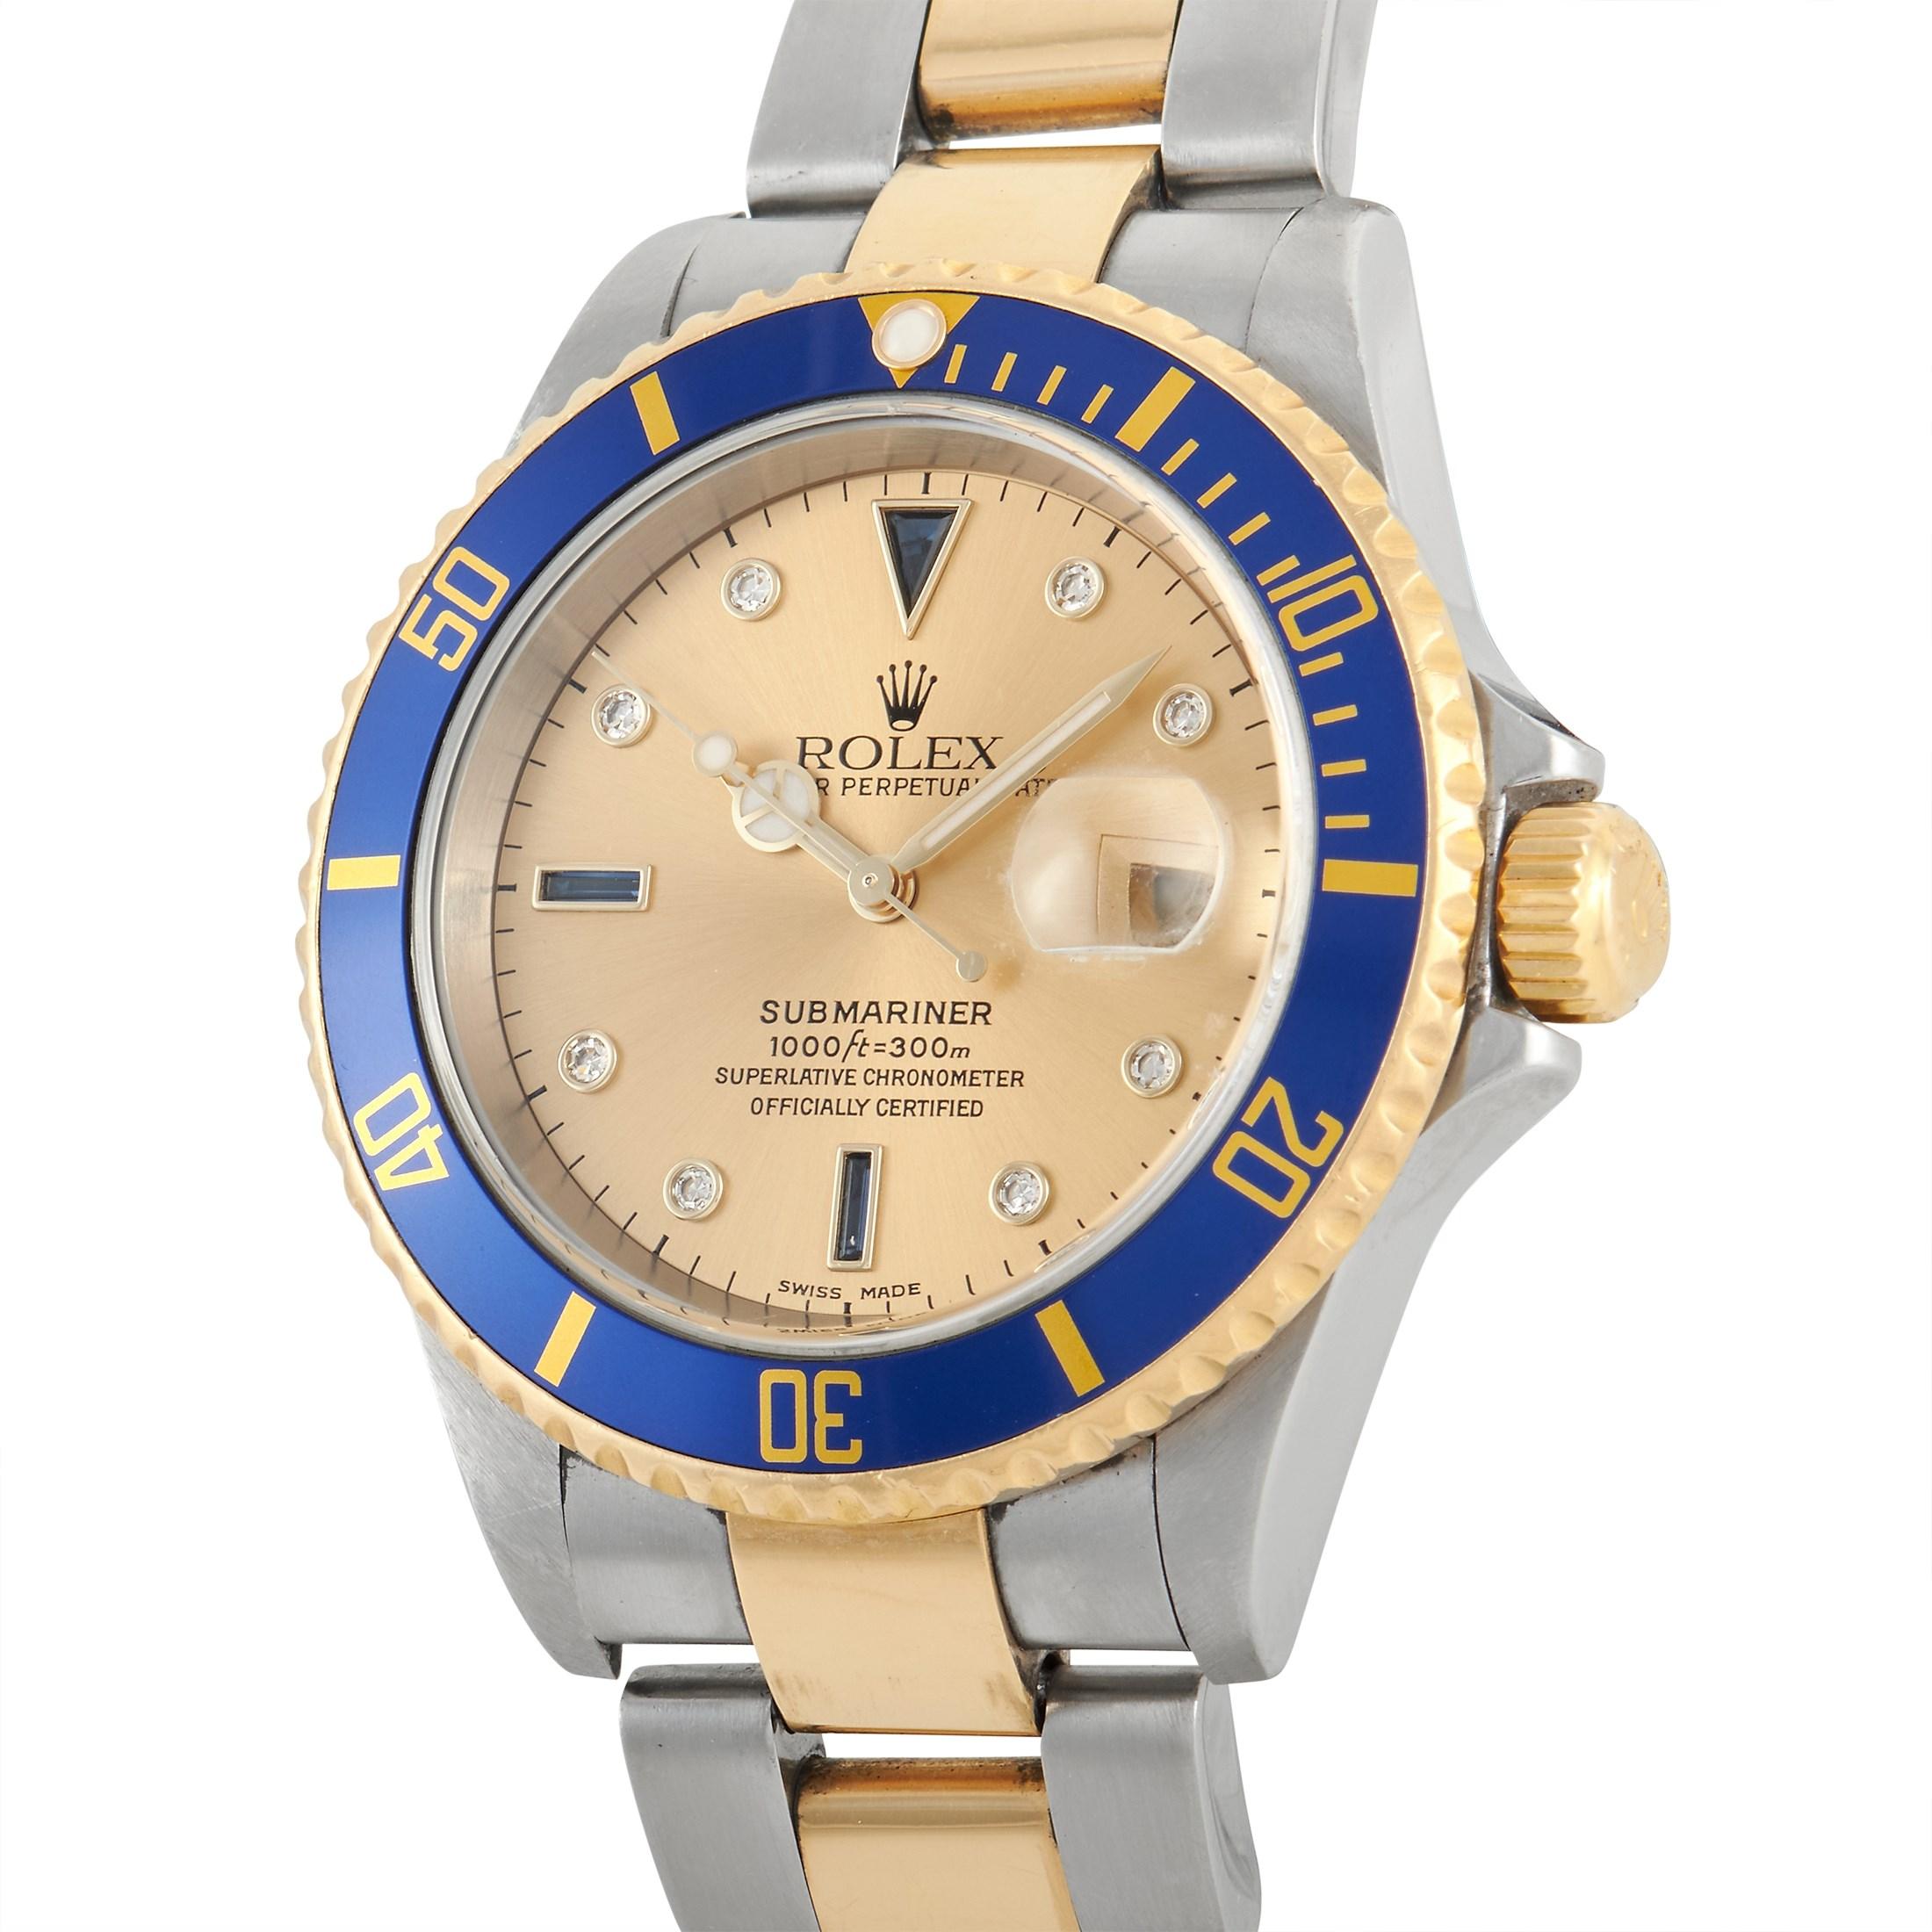 The Rolex Submariner Diamond Sapphire Watch, reference number 16613, is a piece that exudes the type of luxury the Rolex brand is famous for.

This watch includes a 40mm stainless steel case that is accented by a solid 18k yellow gold bezel with a